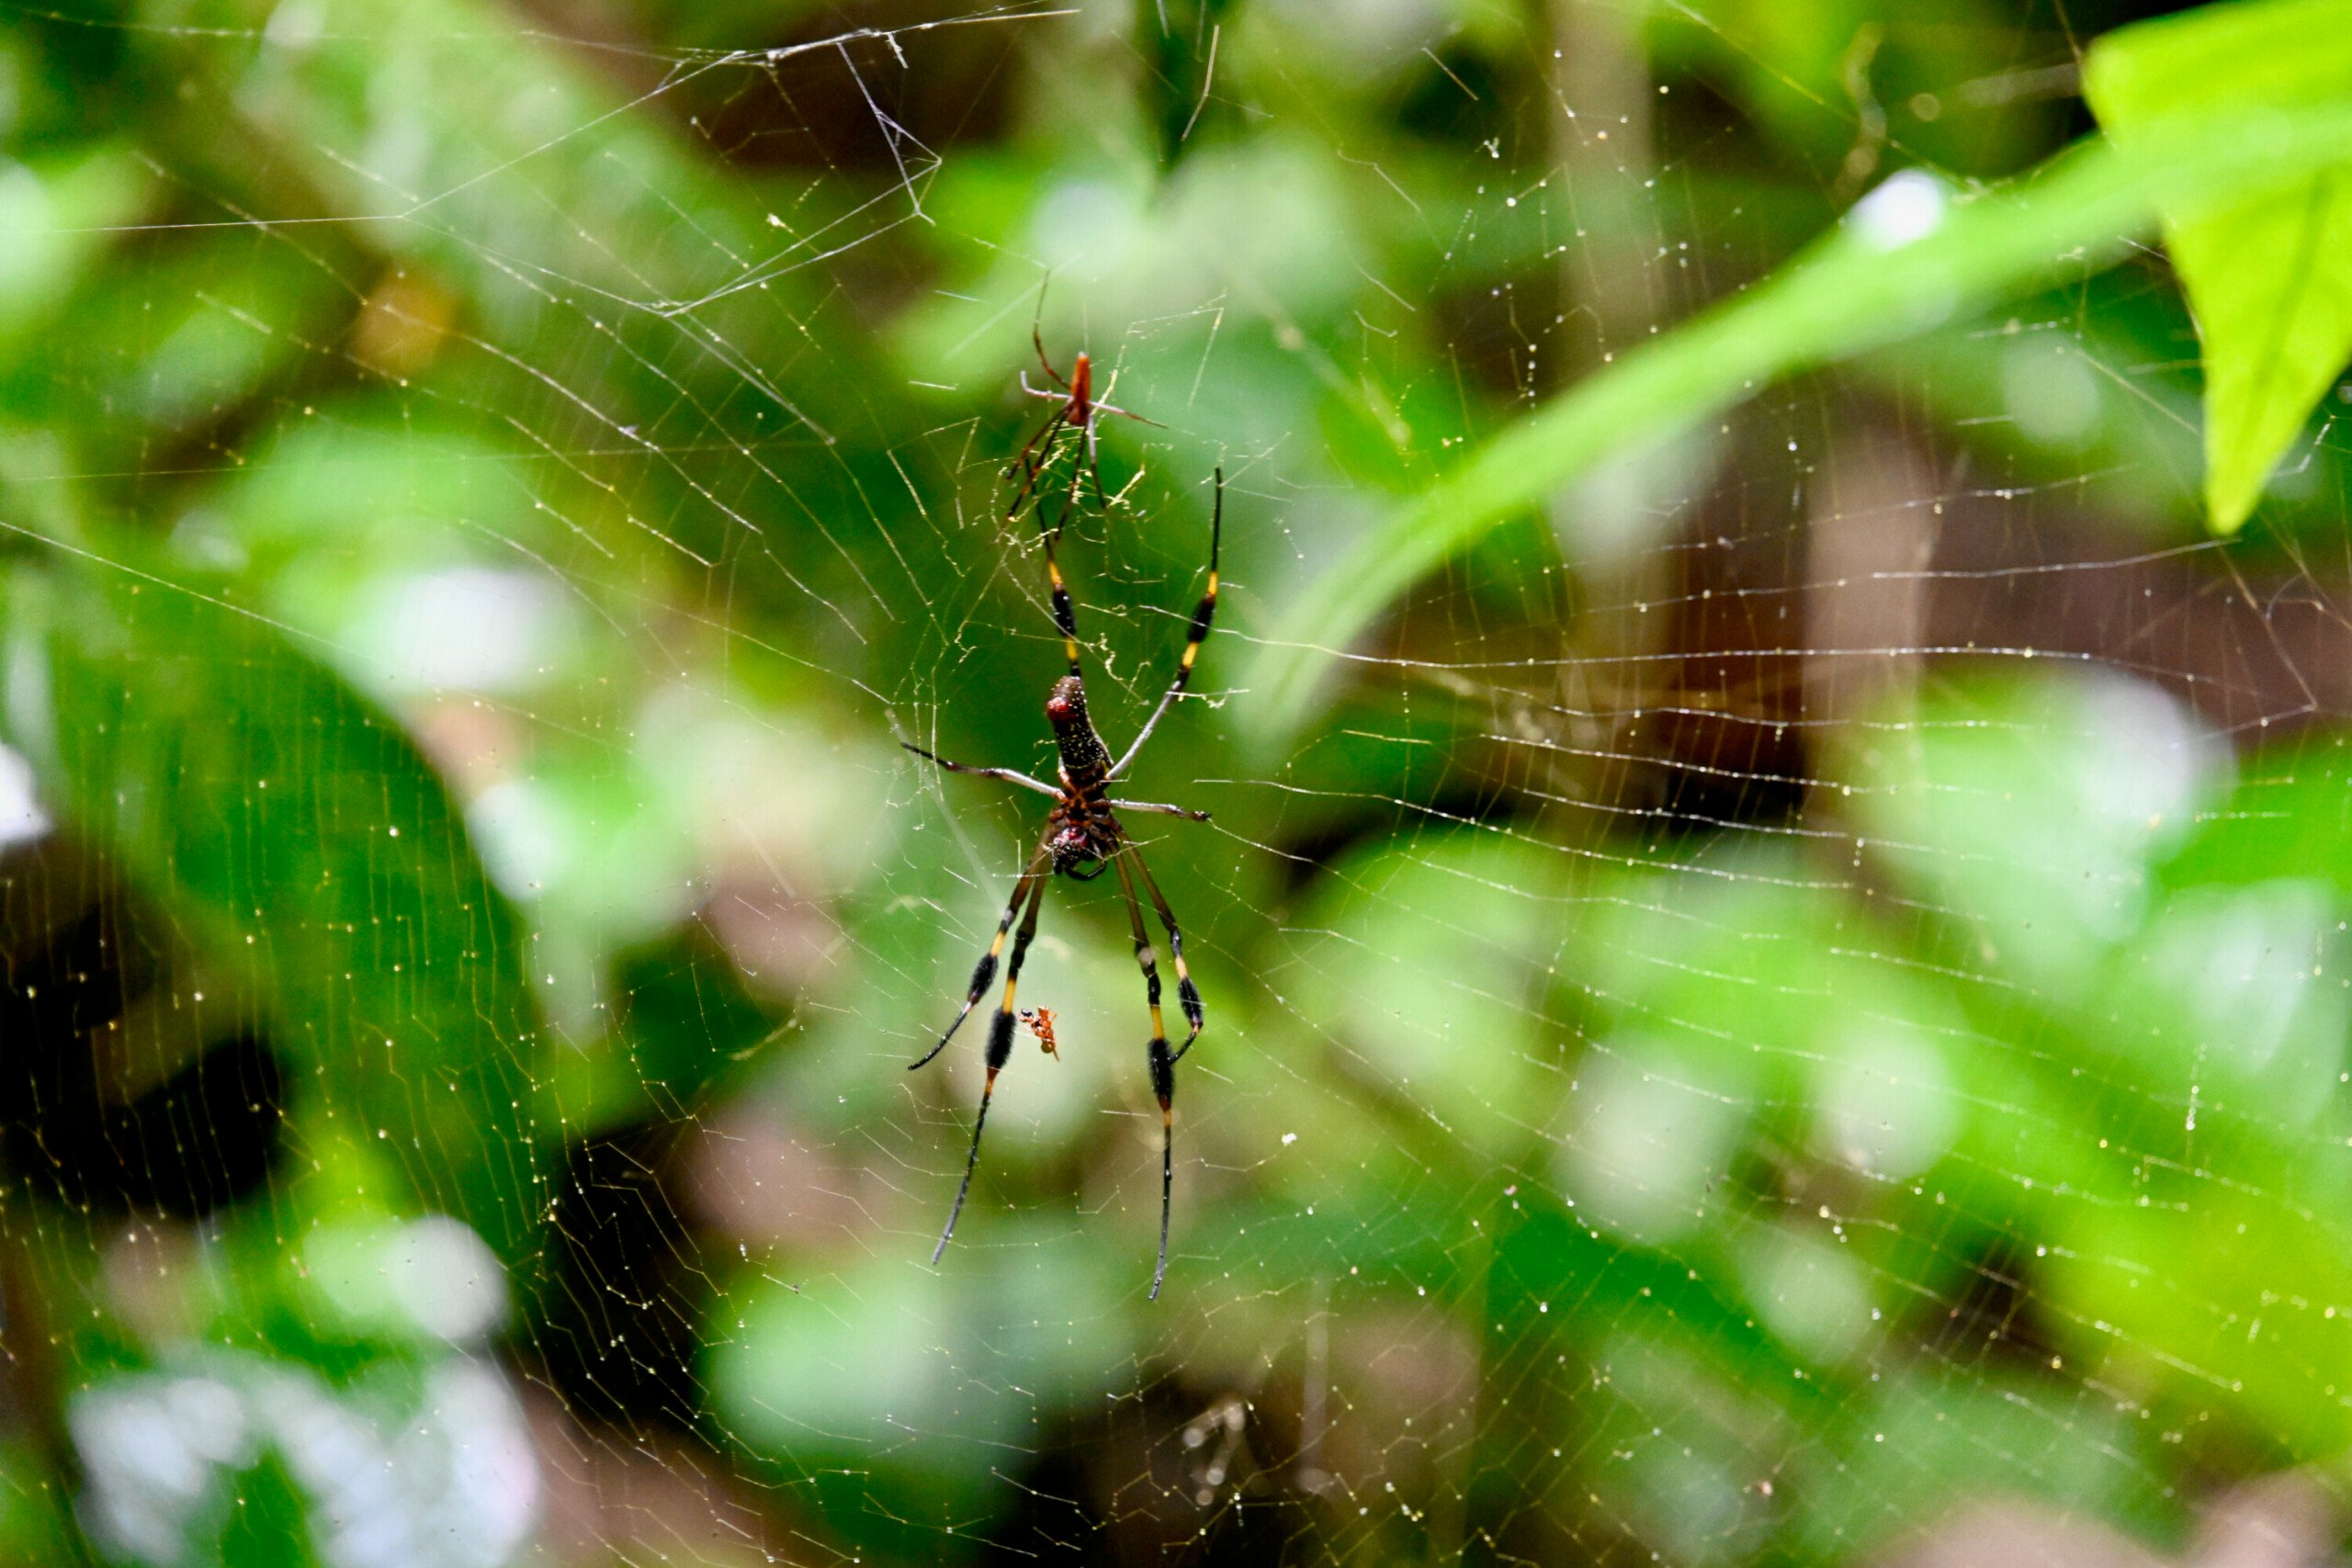 A Golden Orb-Weaver spider is suspended in its intricate web against a blurred green forest backdrop in Carara National Park.